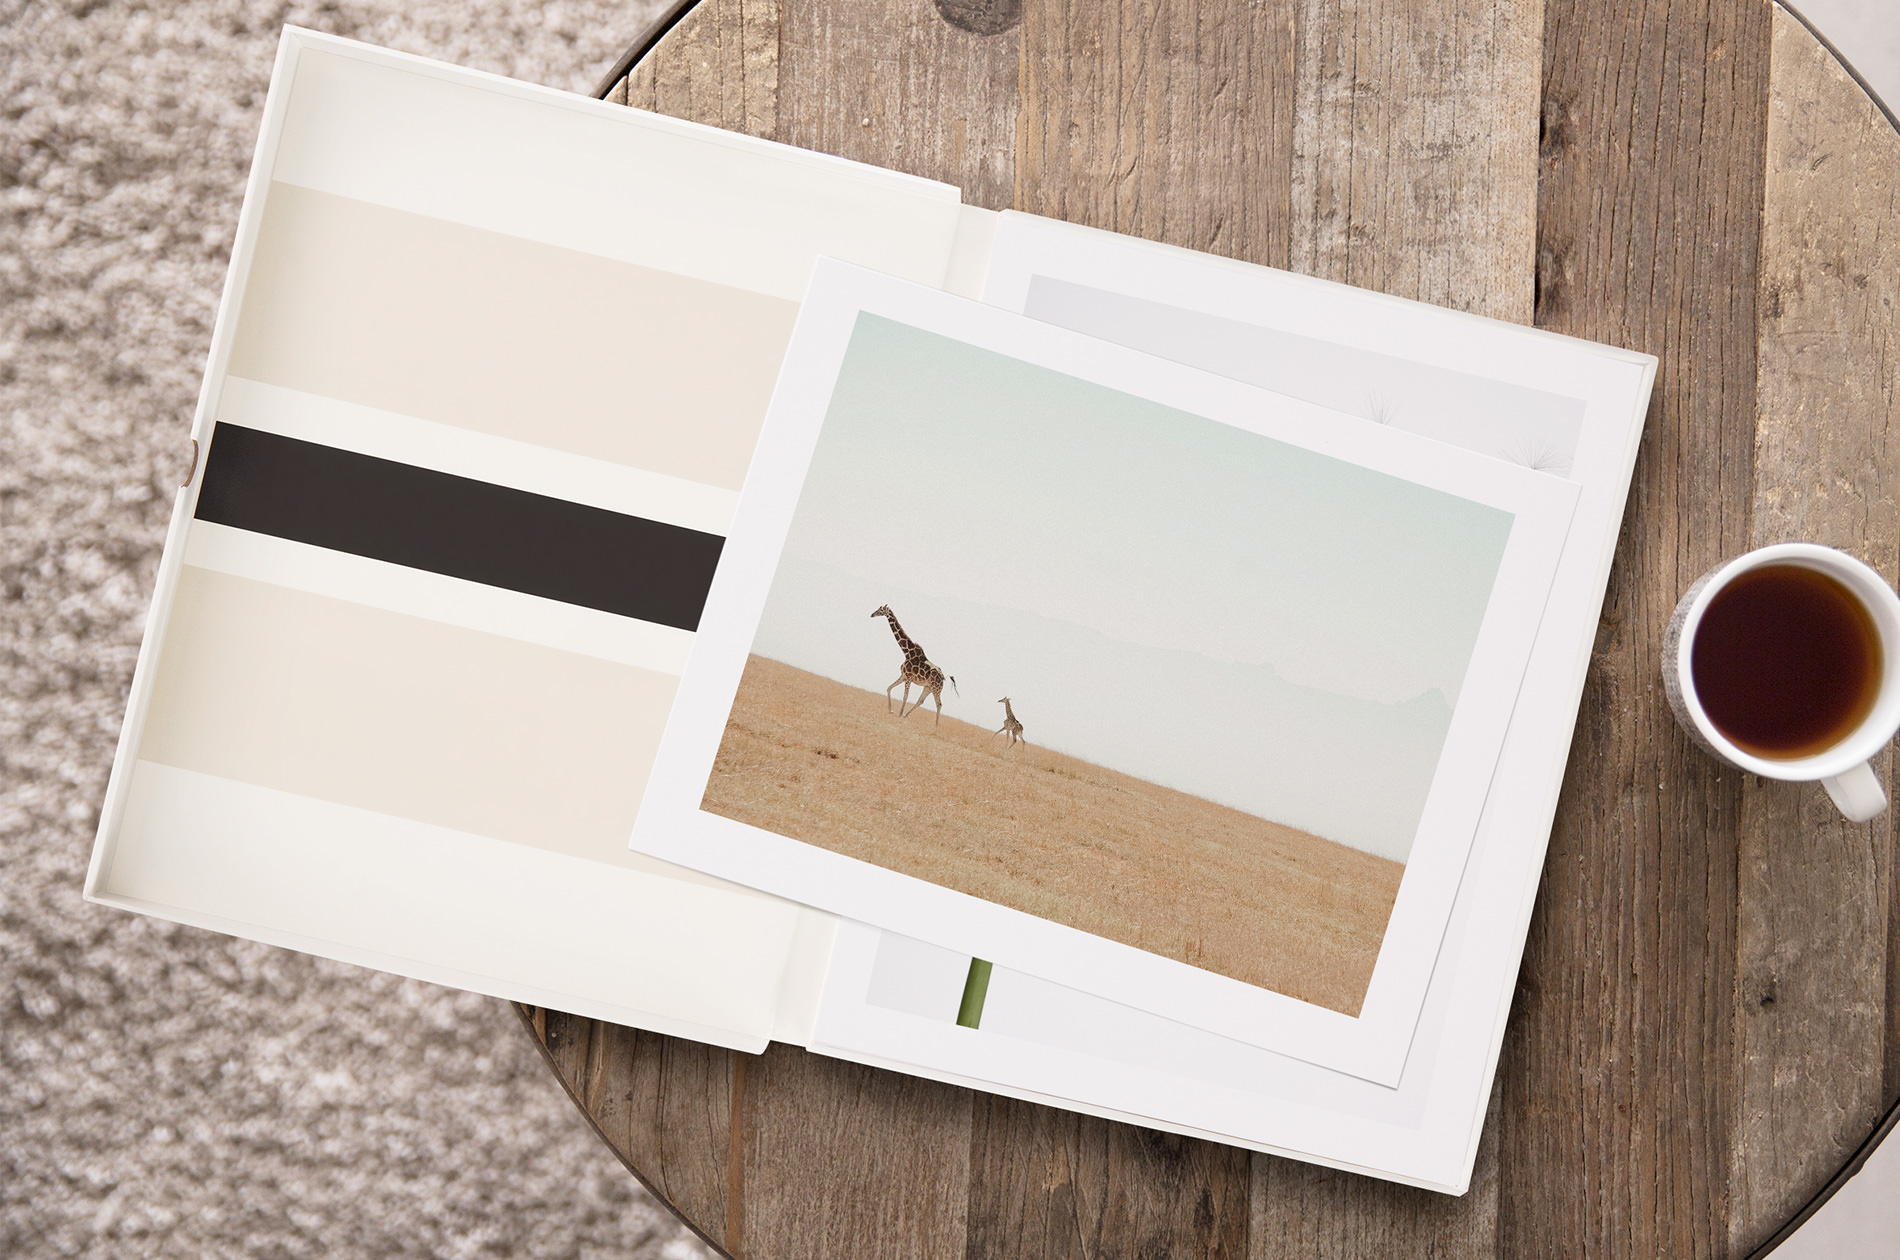 Art print set on a coffee table with image of two giraffes.